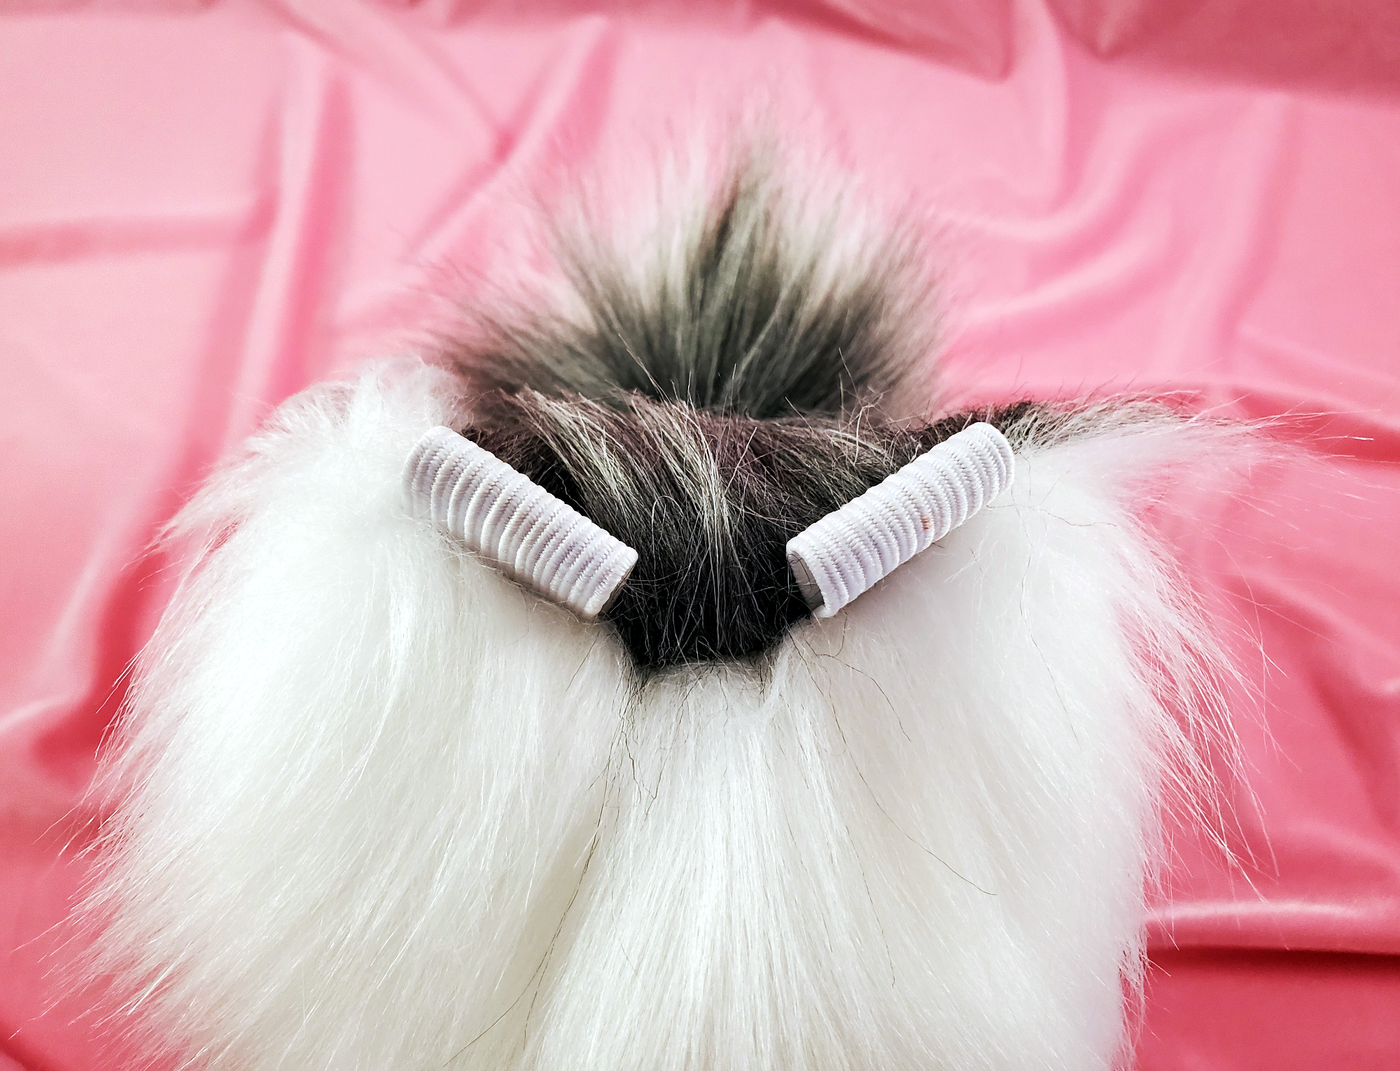 Custom Curled Shiba/Pup Tail - Fluffy Paw Shop - Petplay BDSM DDLG Kitten Play Tail Cosplay Furry